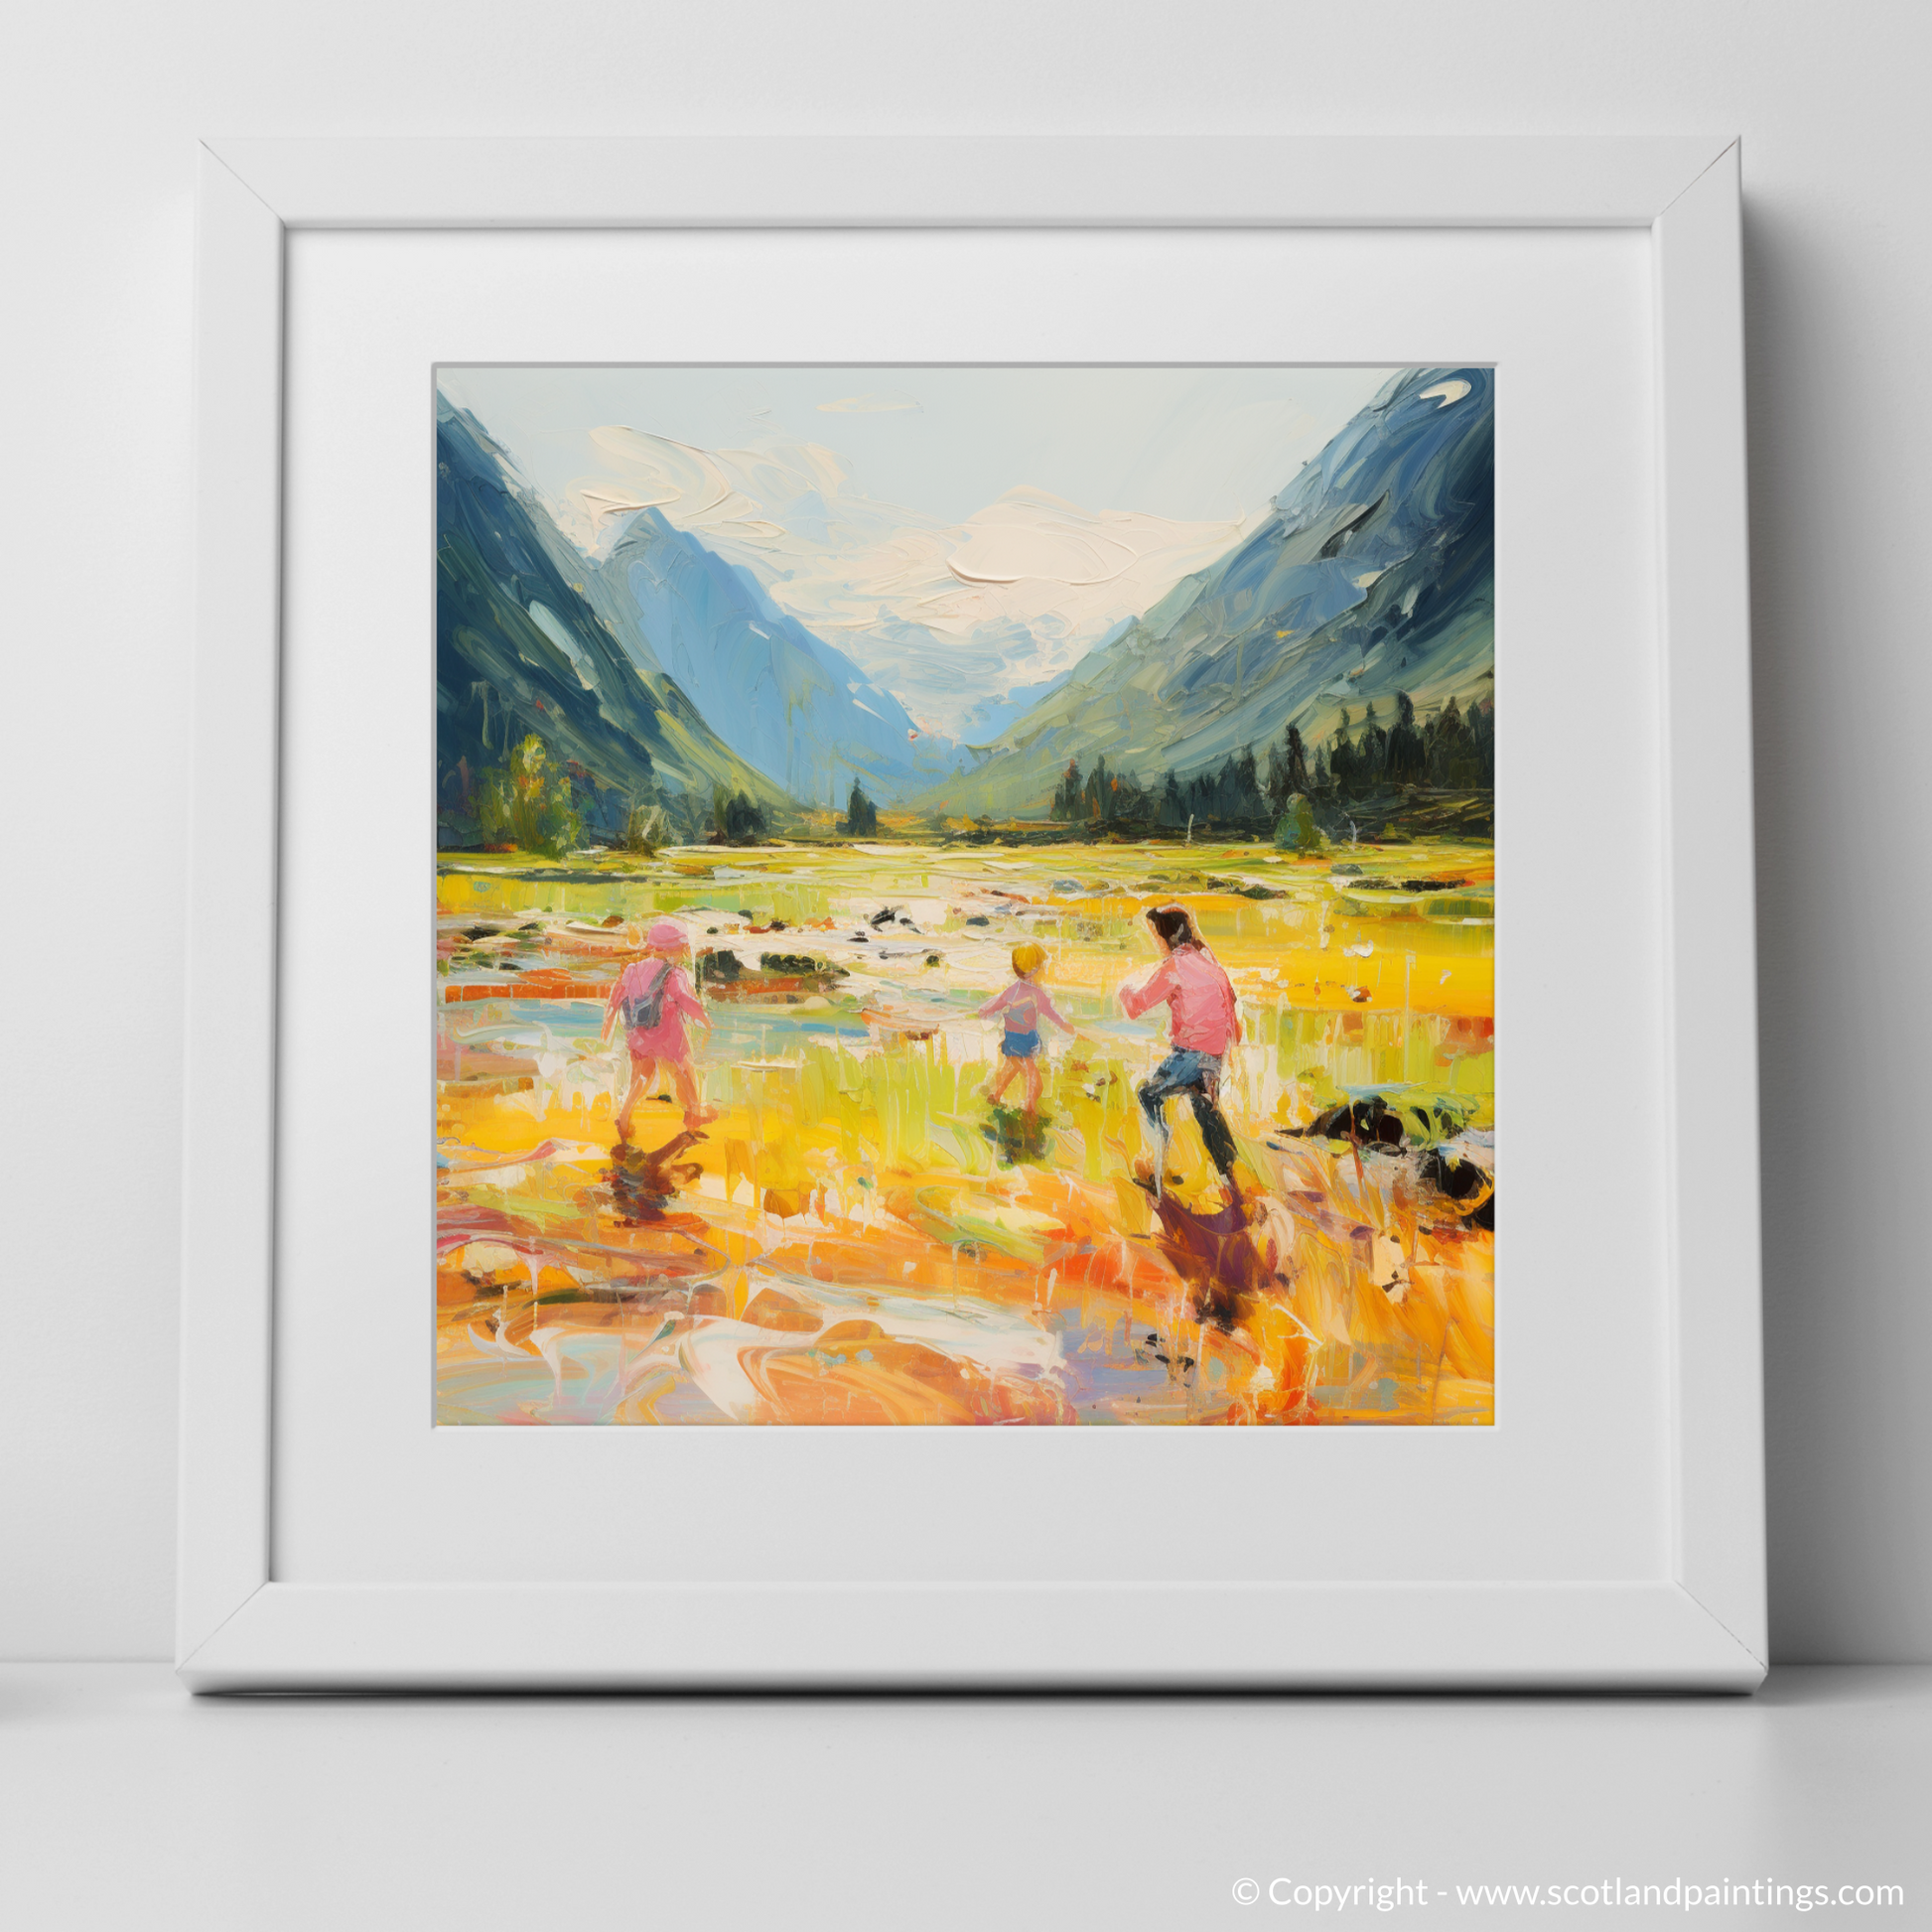 Art Print of Children playing in Glencoe during summer with a white frame